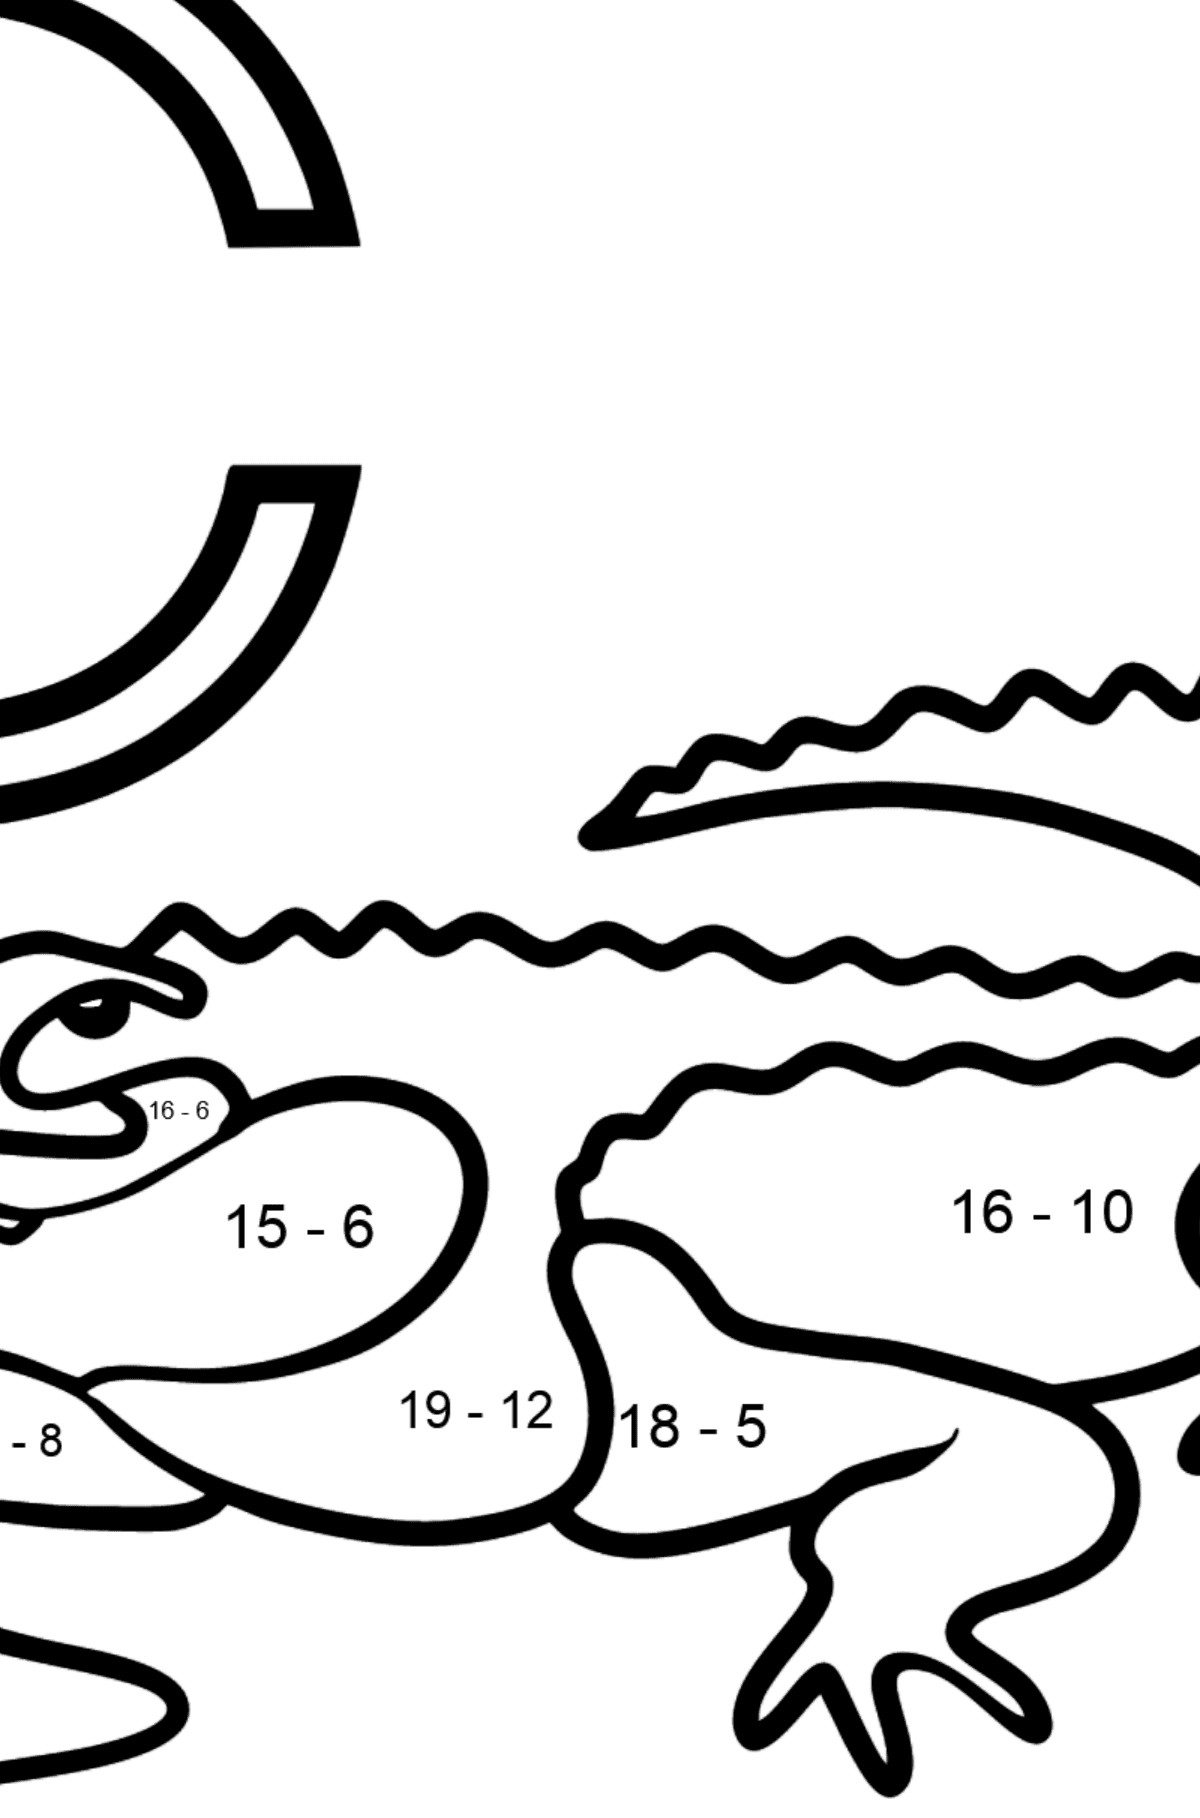 Spanish Letter C coloring pages - COCODRILO - Math Coloring - Subtraction for Kids